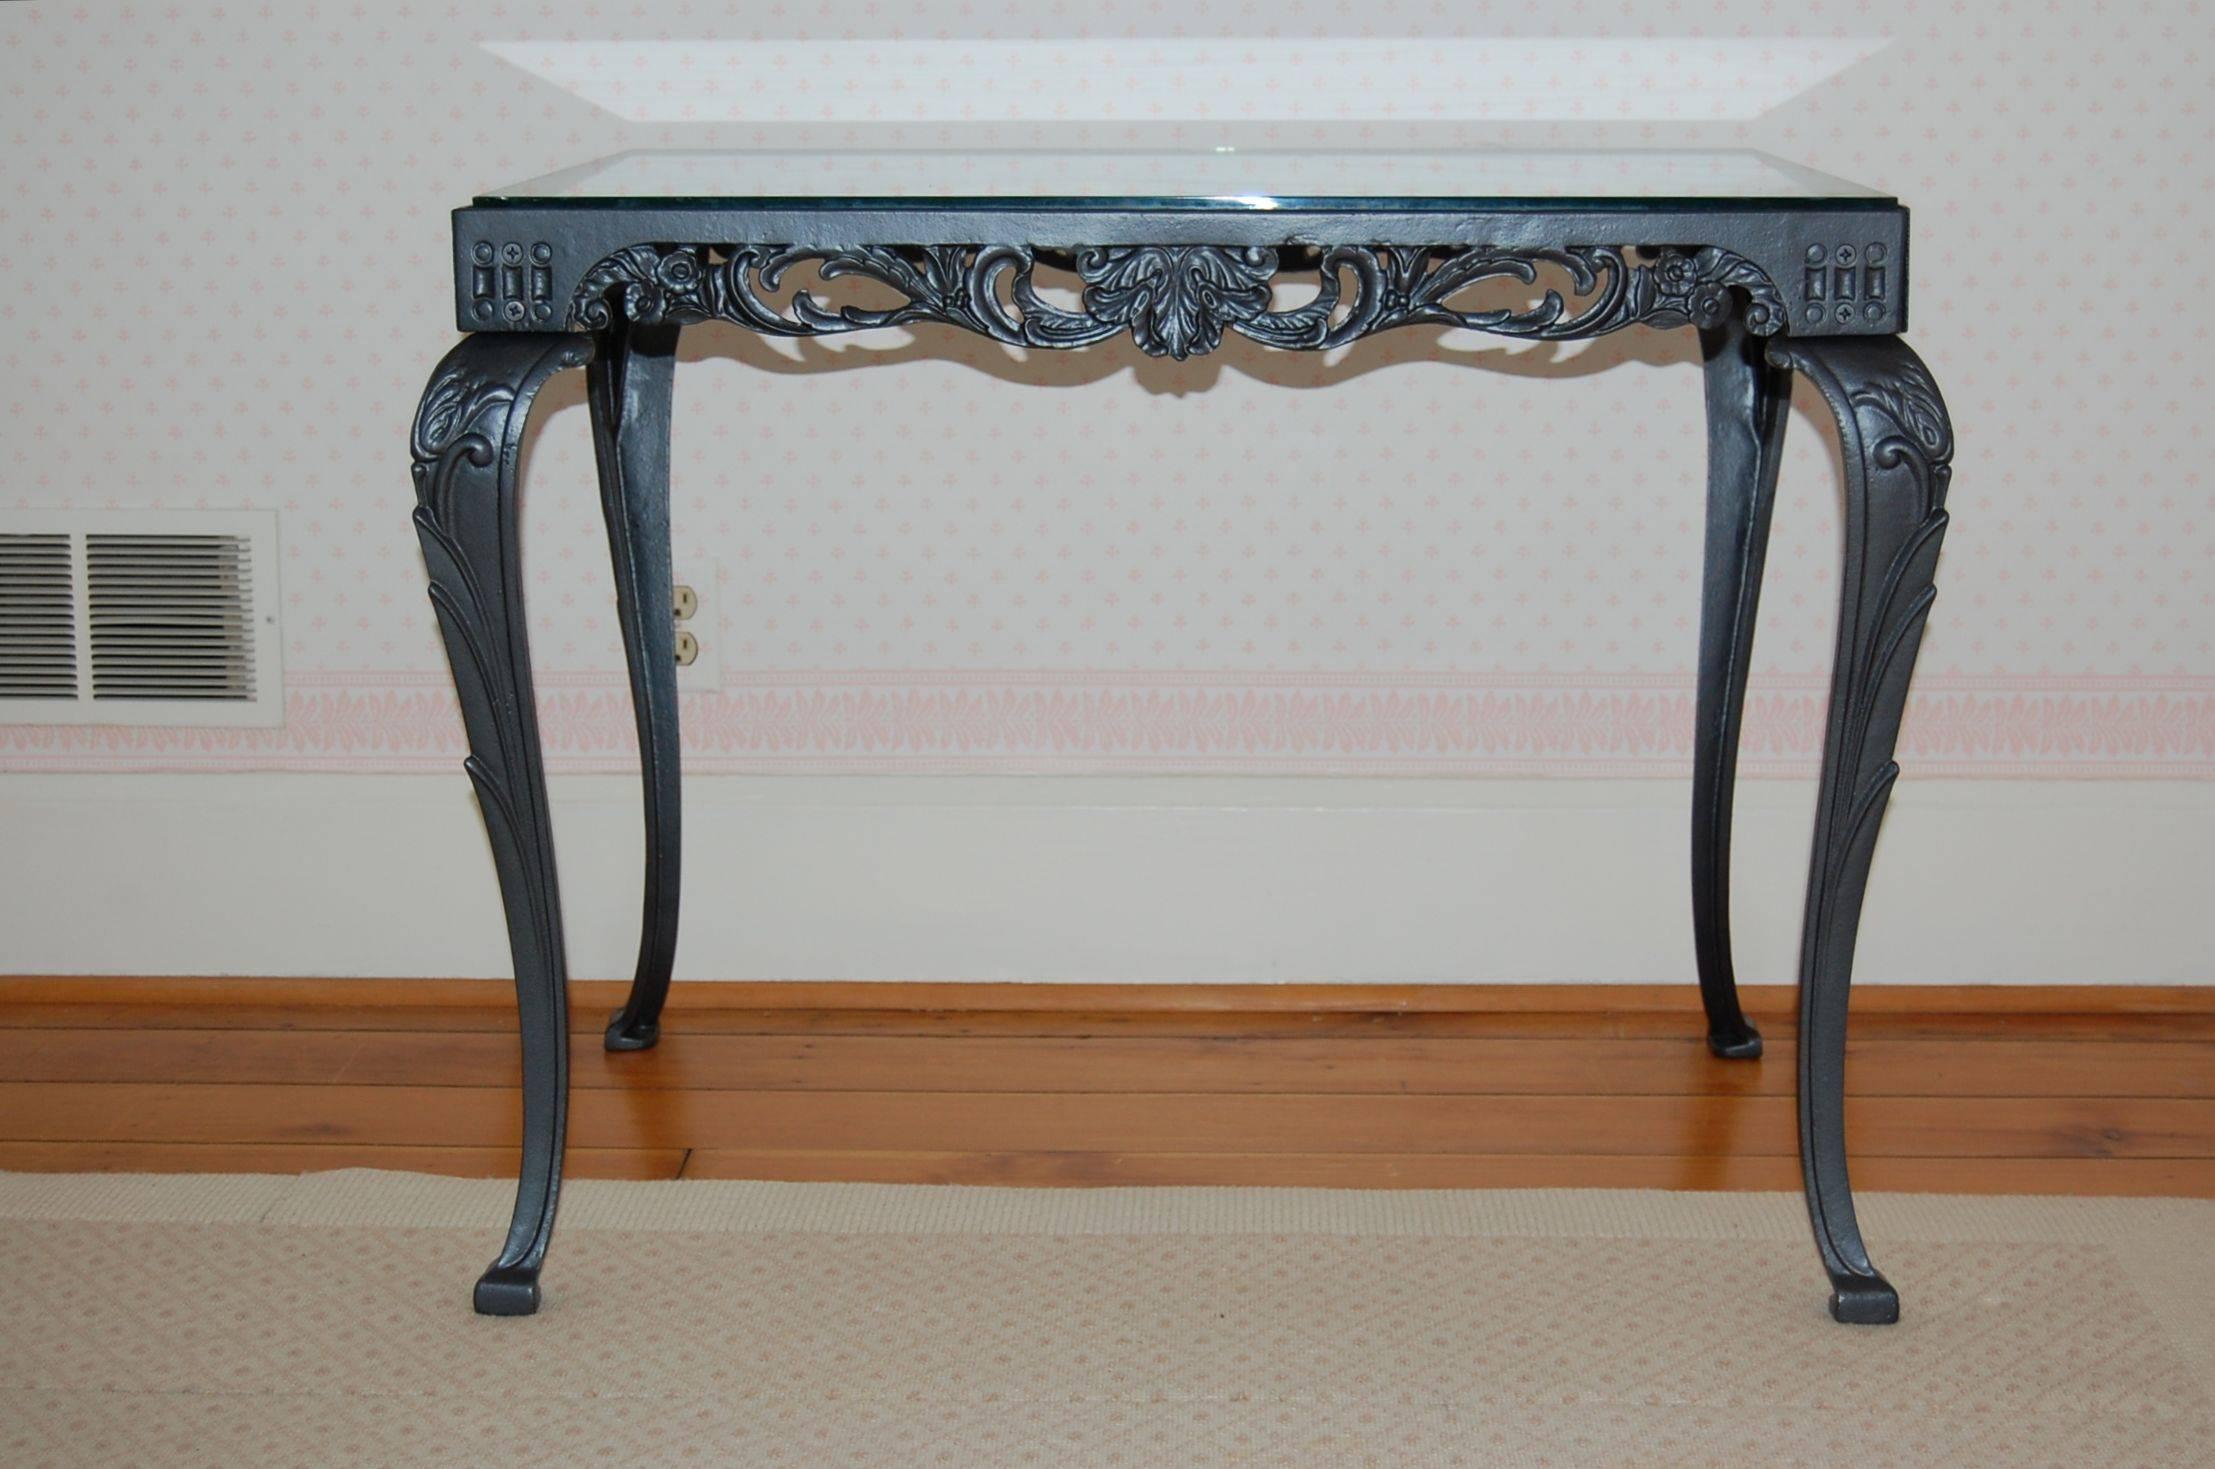 Beautiful cast iron table has just been powder coated in a dark gun metal finish.